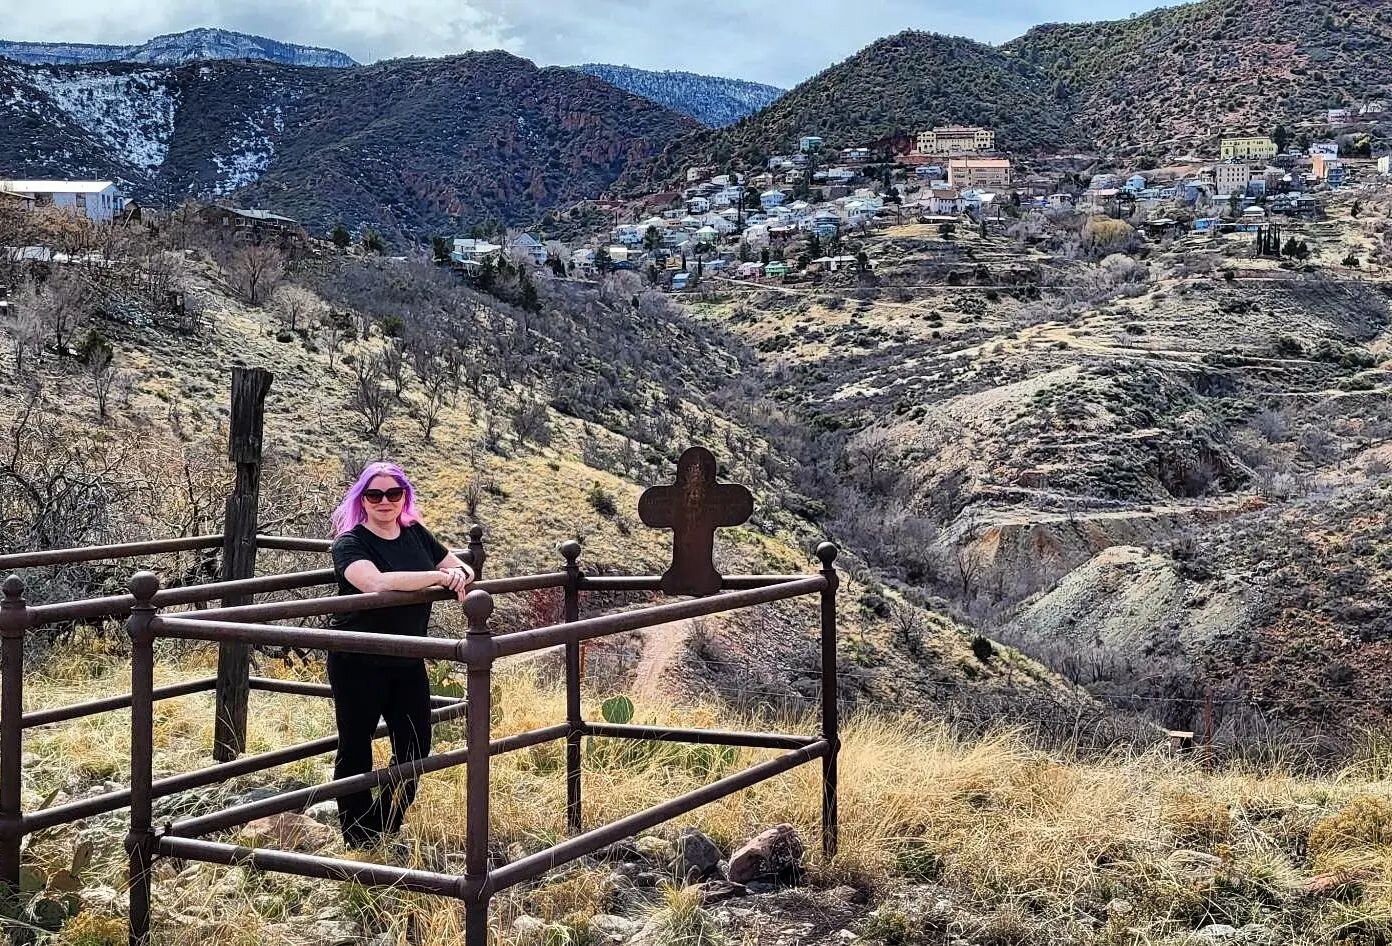 Hi friends!  I'm currently in Arizona, a place with cemeteries very different from our own.  I'll post a round up of photos when I return.  This is a shot of me with the mining town of Jerome in the background.